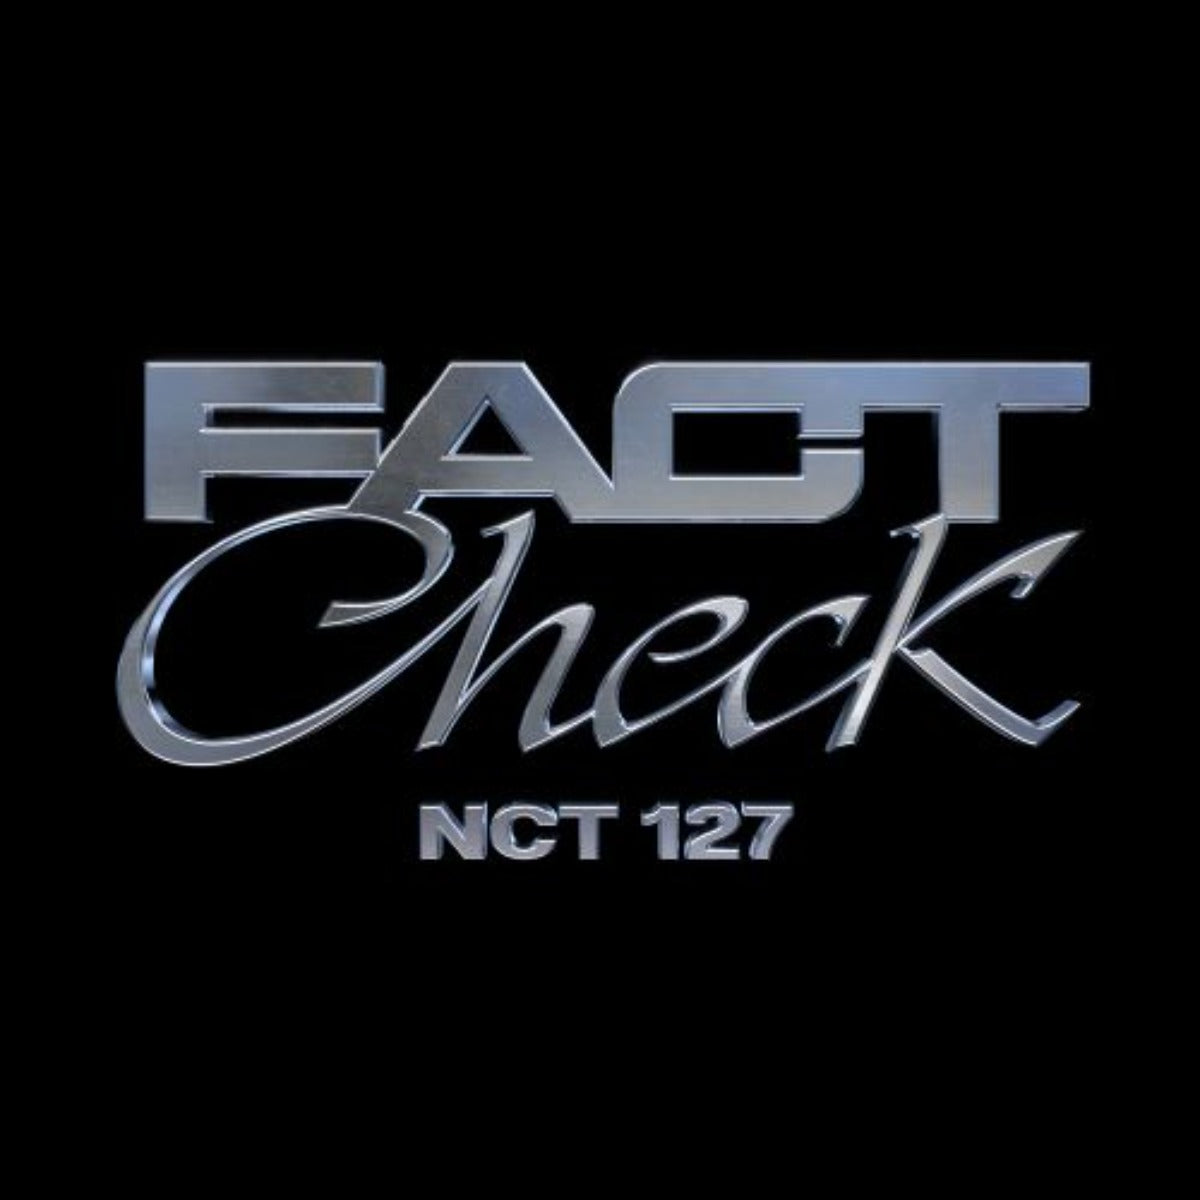 NCT 127 Vol. 5 - Fact Check (Chandelier Version)